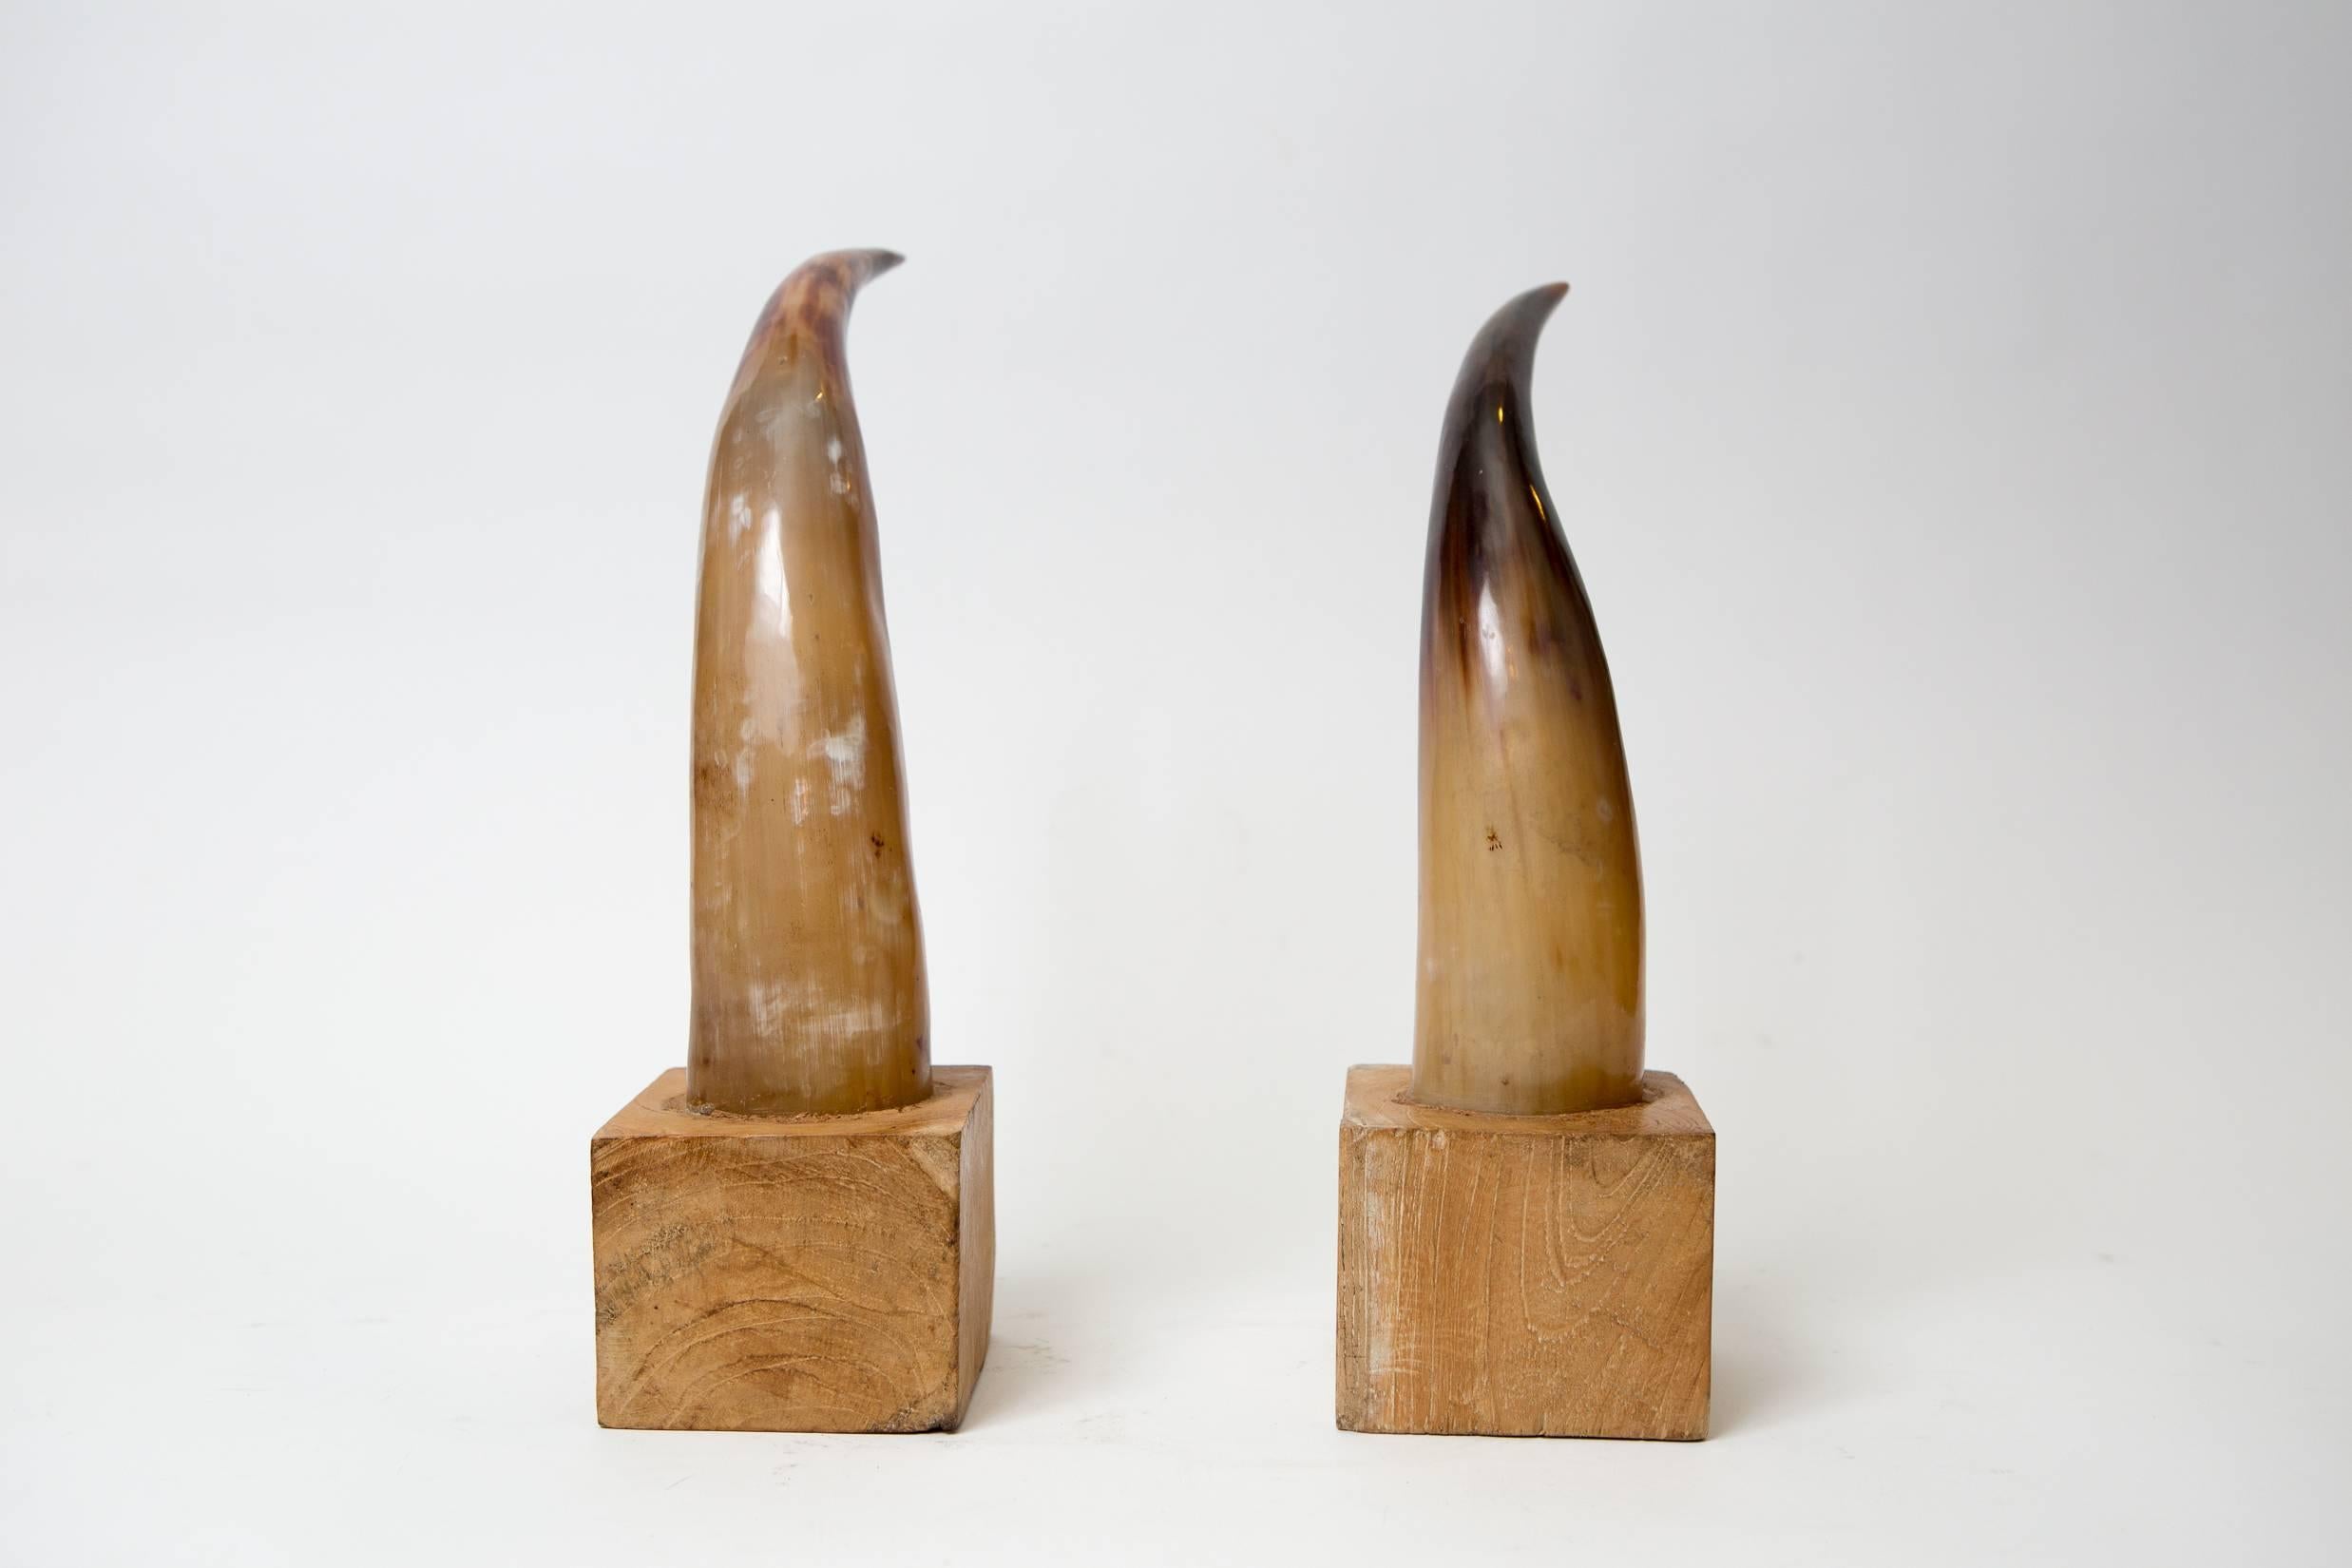 American Moo Moo Designs Horn Bookends